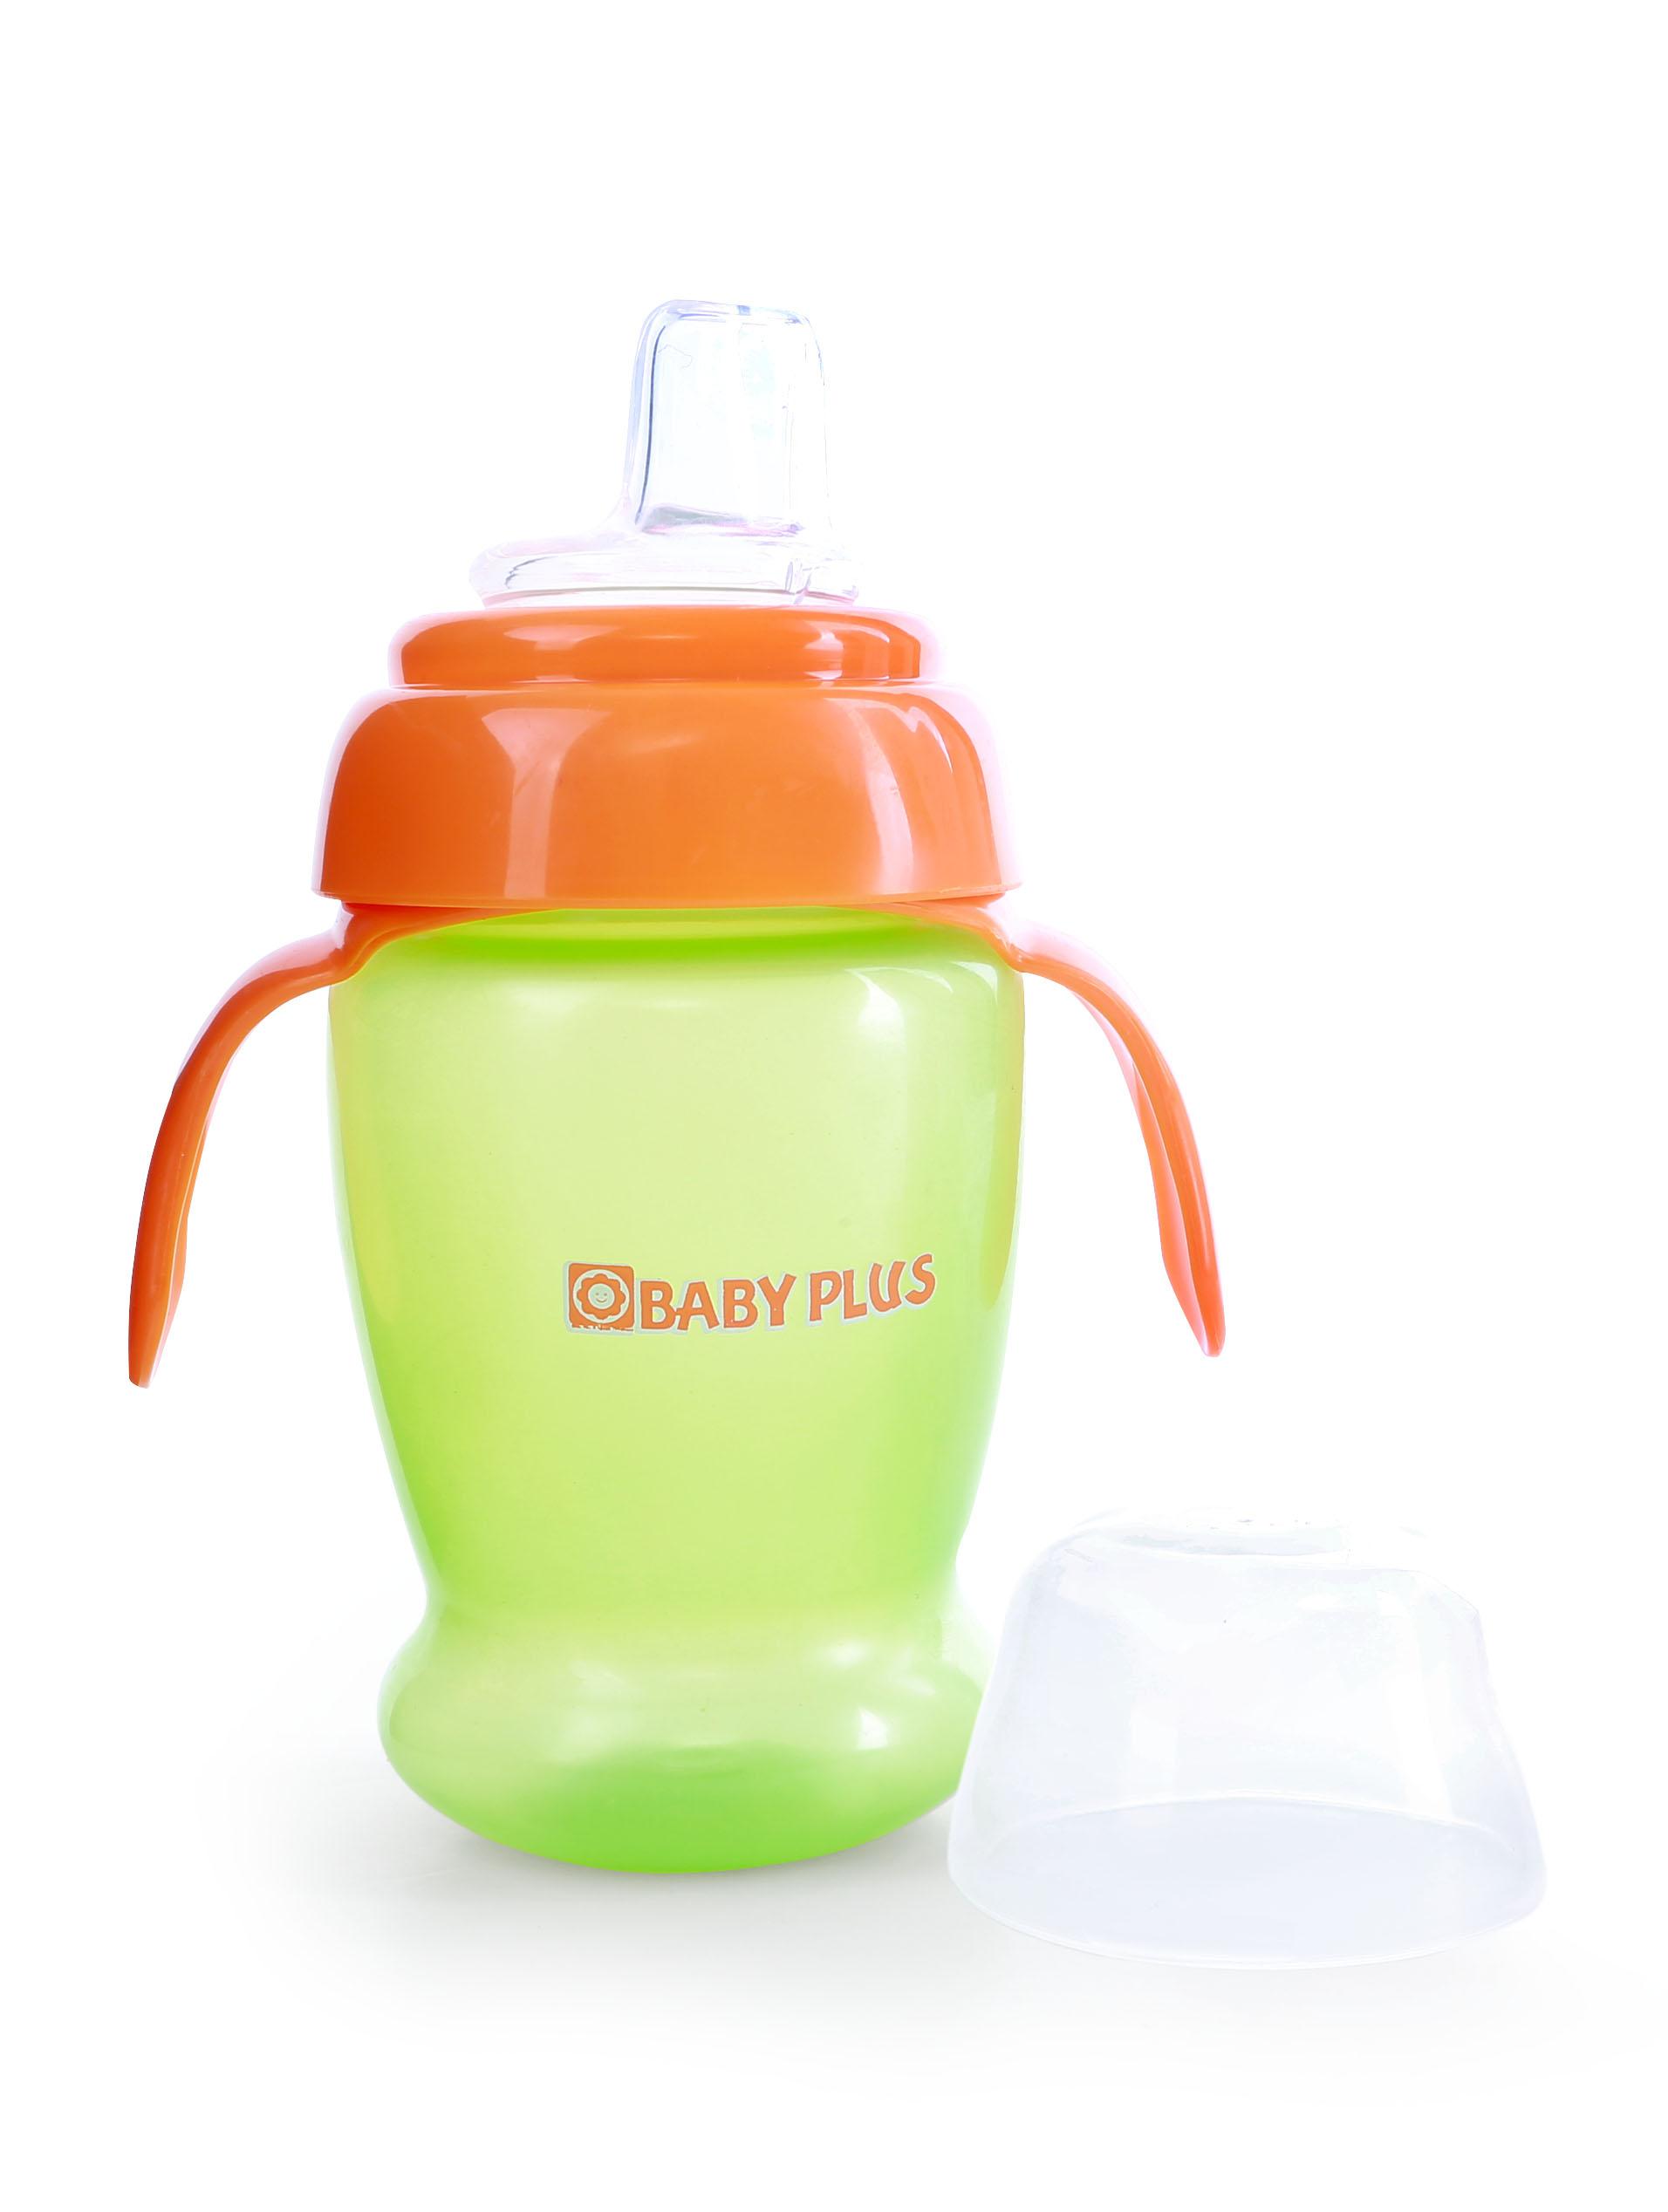 Baby Plus Baby Cup With 2 Handles - Portable Baby Cup First Cups, Anti-Colic Baby Bottle, Safe